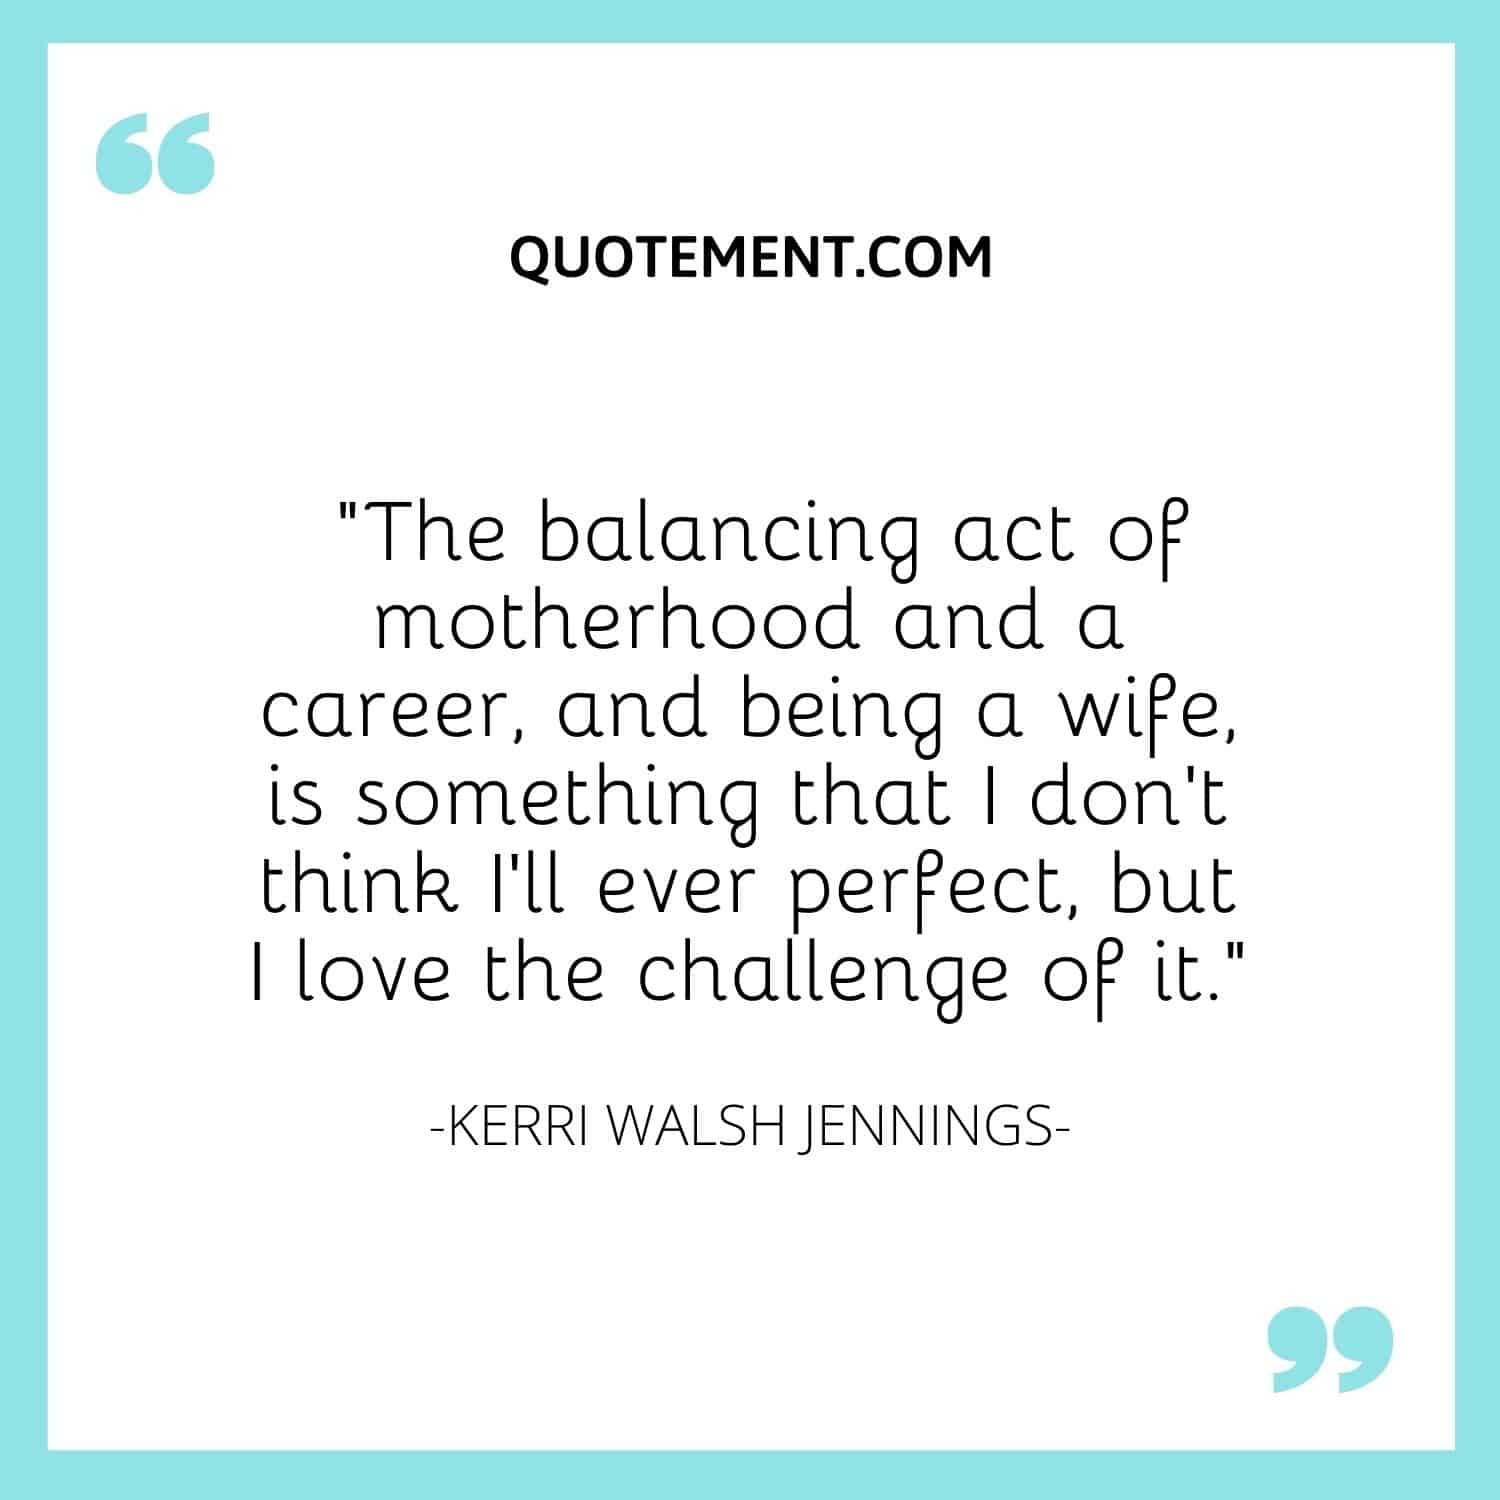 The balancing act of motherhood and a career, and being a wife, is something that I don’t think I’ll ever perfect, but I love the challenge of it